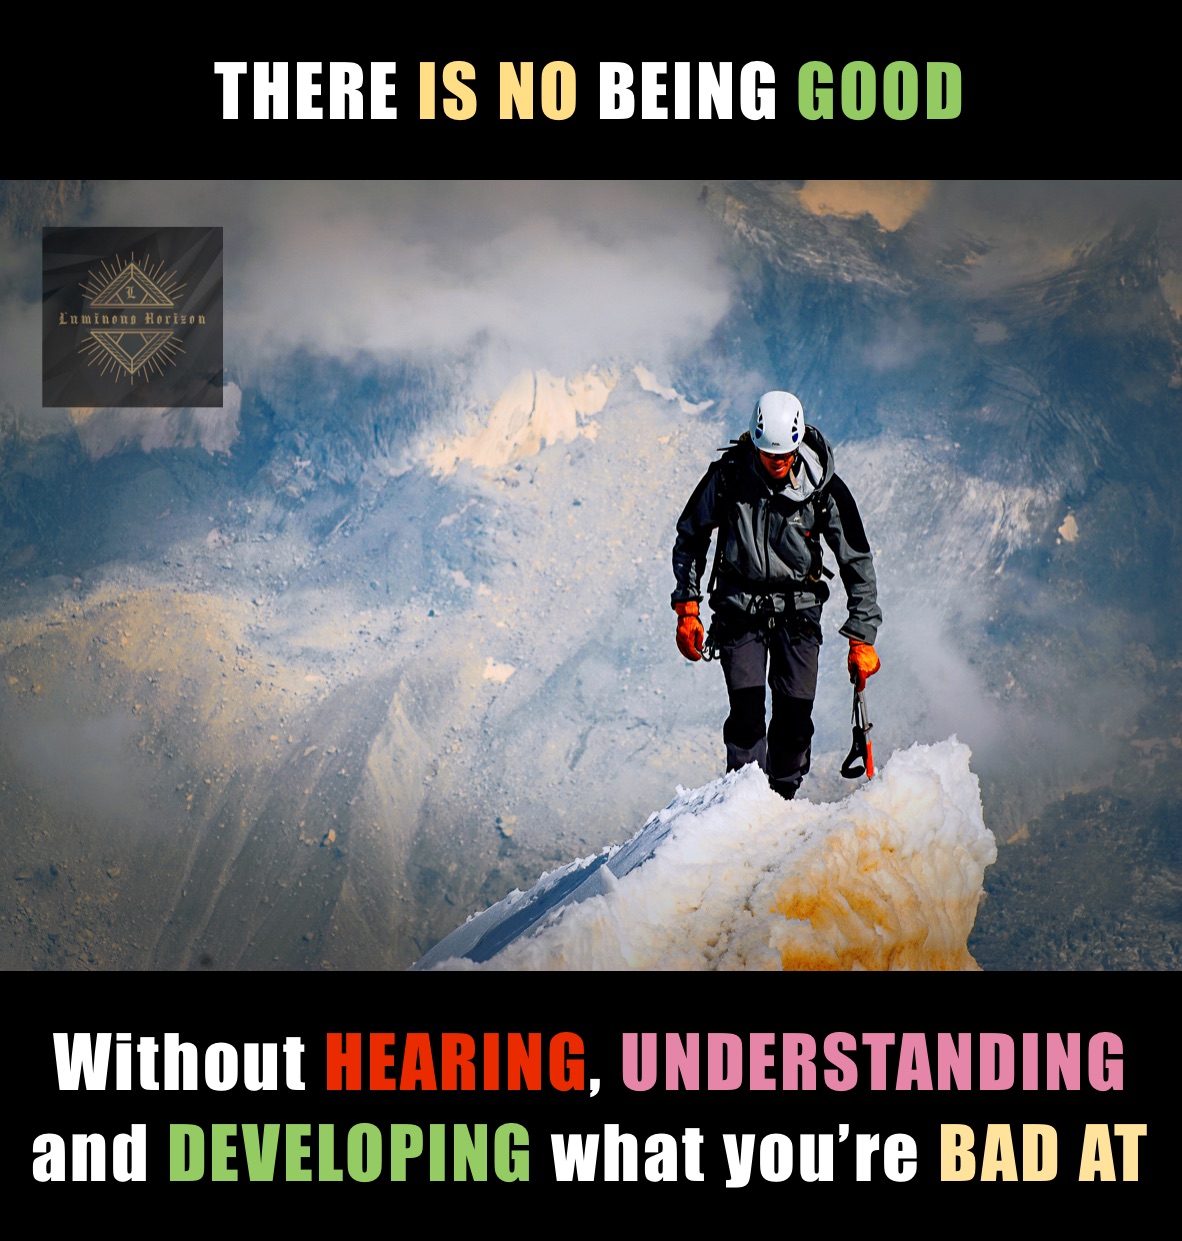 THERE IS NO BEING GOOD Without HEARING, UNDERSTANDING and DEVELOPING what you’re BAD AT Without listening, understanding and correcting what you’re’ bad at